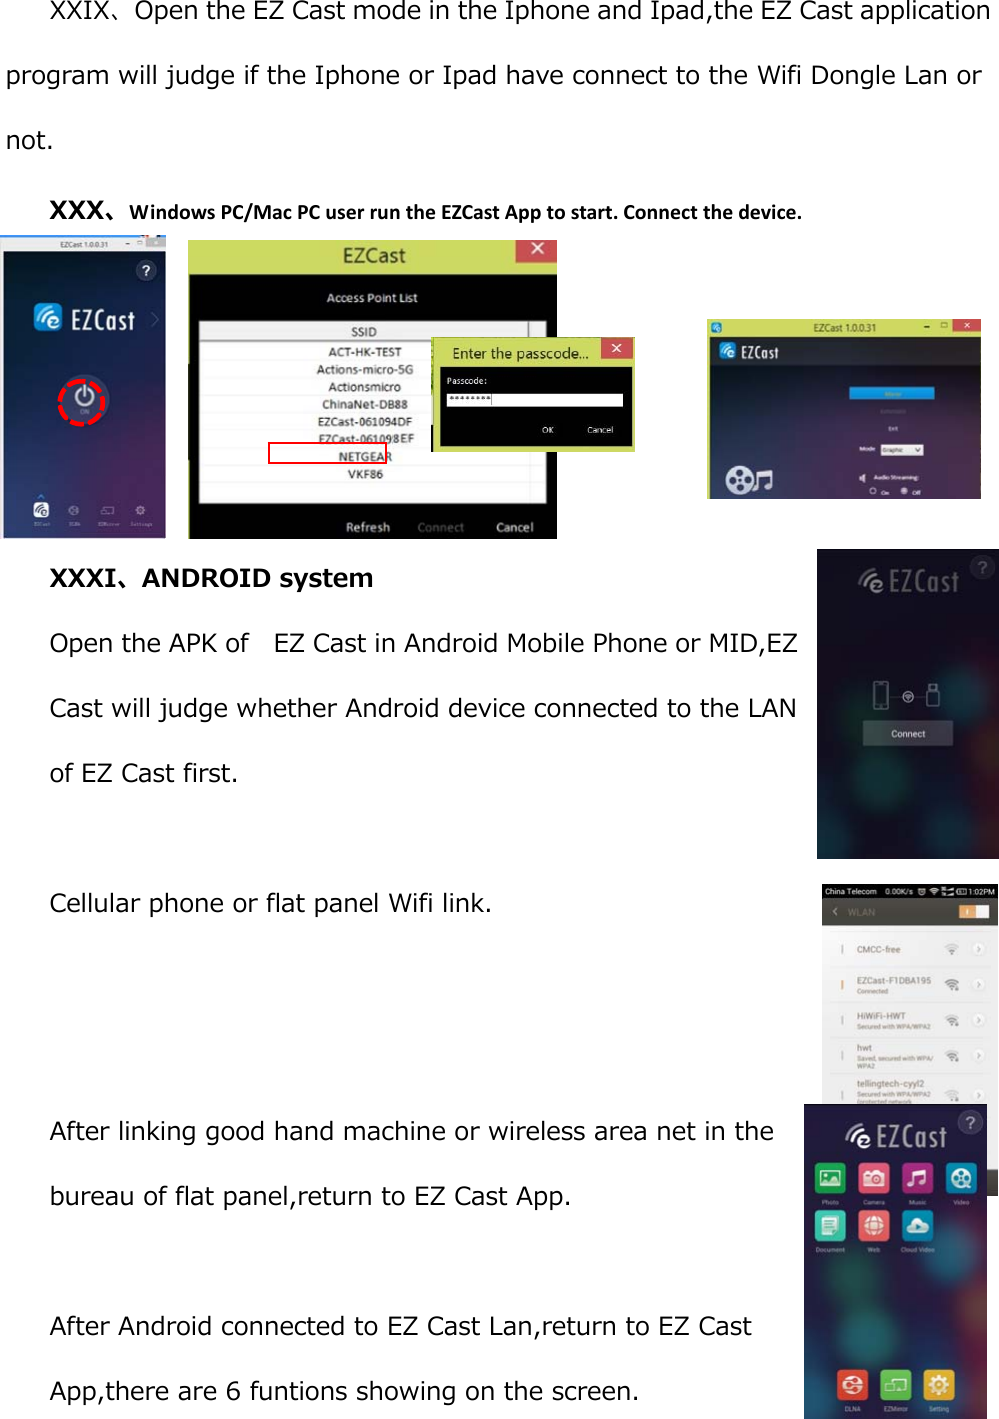 XXIX、Open the EZ Cast mode in the Iphone and Ipad,the EZ Cast application program will judge if the Iphone or Ipad have connect to the Wifi Dongle Lan or not. XXX、WindowsPC/MacPCuserruntheEZCastApptostart.Connectthedevice.      XXXI、ANDROID system Open the APK of    EZ Cast in Android Mobile Phone or MID,EZ Cast will judge whether Android device connected to the LAN of EZ Cast first.  Cellular phone or flat panel Wifi link. After linking good hand machine or wireless area net in the bureau of flat panel,return to EZ Cast App.  After Android connected to EZ Cast Lan,return to EZ Cast App,there are 6 funtions showing on the screen. 